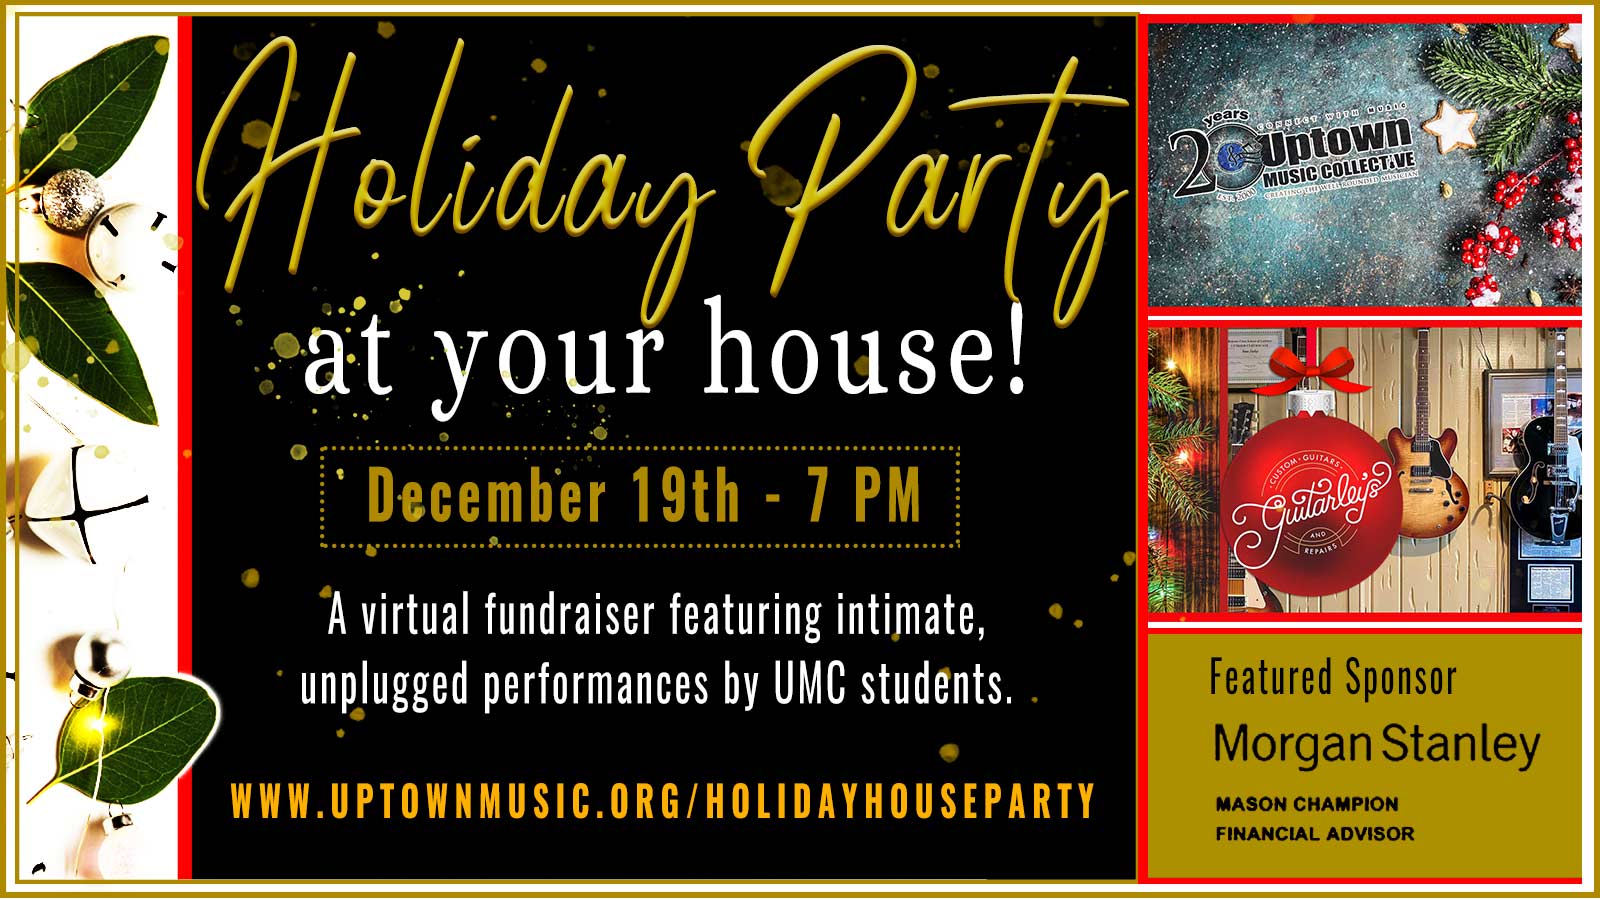 We are having a Holiday Party Fundraiser December 19th - 7 Pm